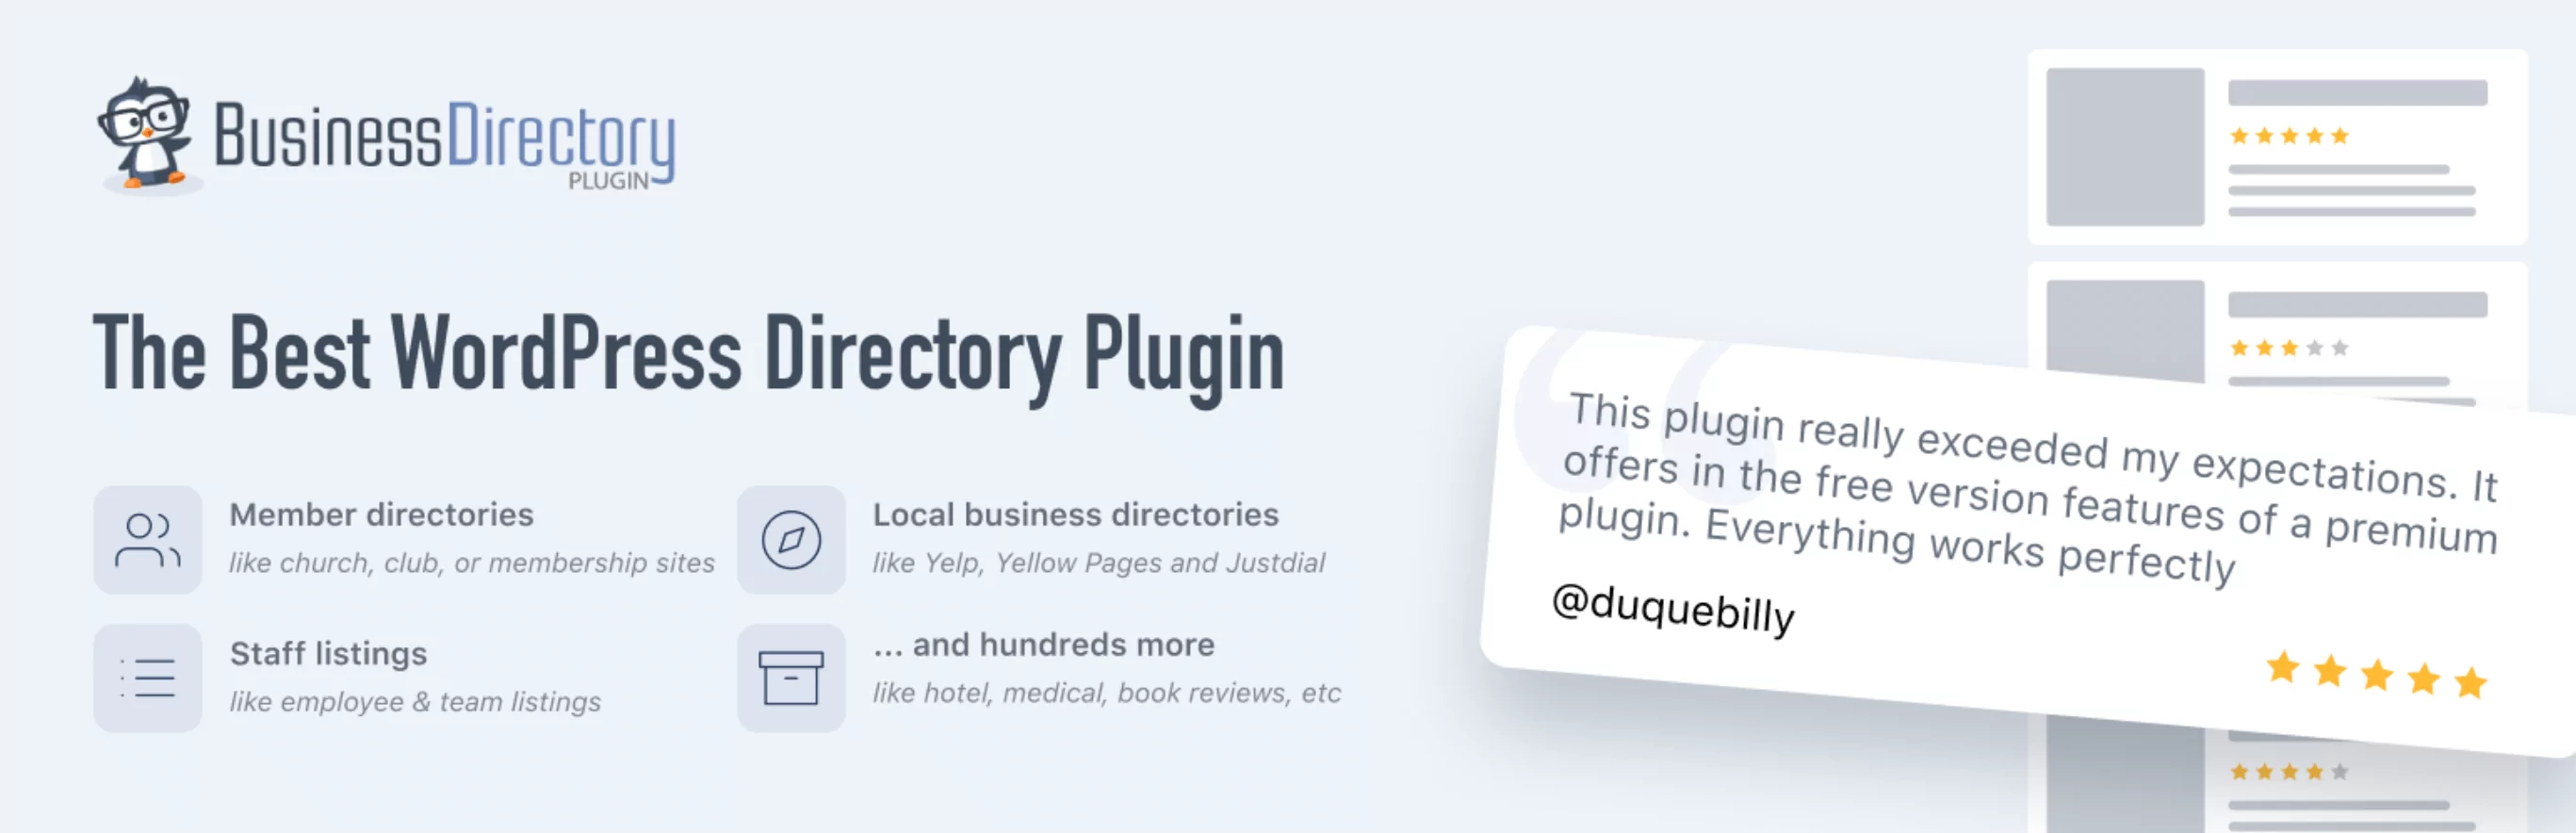 The Business Directory Plugin for WordPress